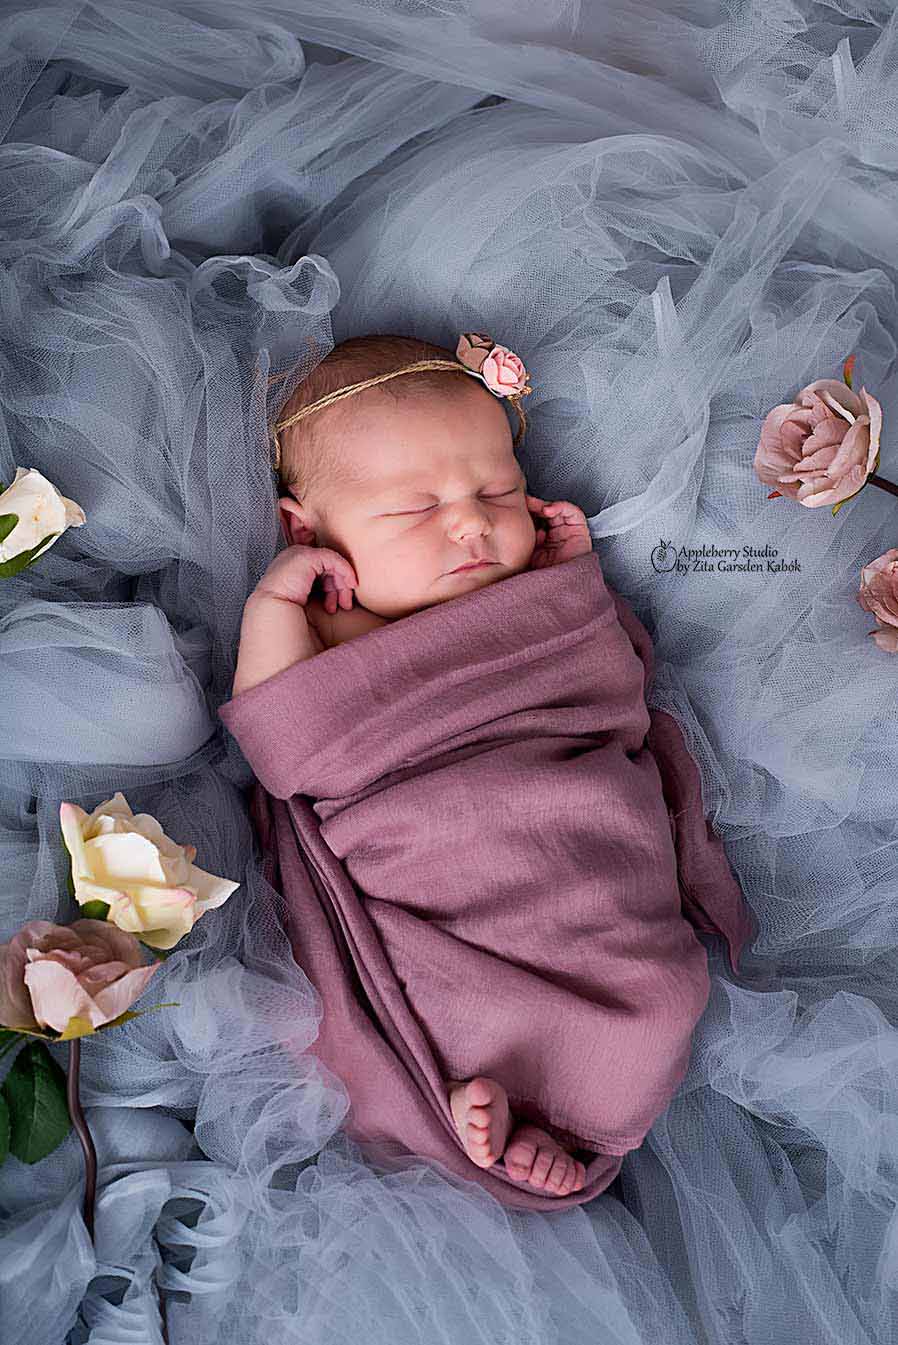 Black and white photo of newborn baby with white backdrop, studio shooting.